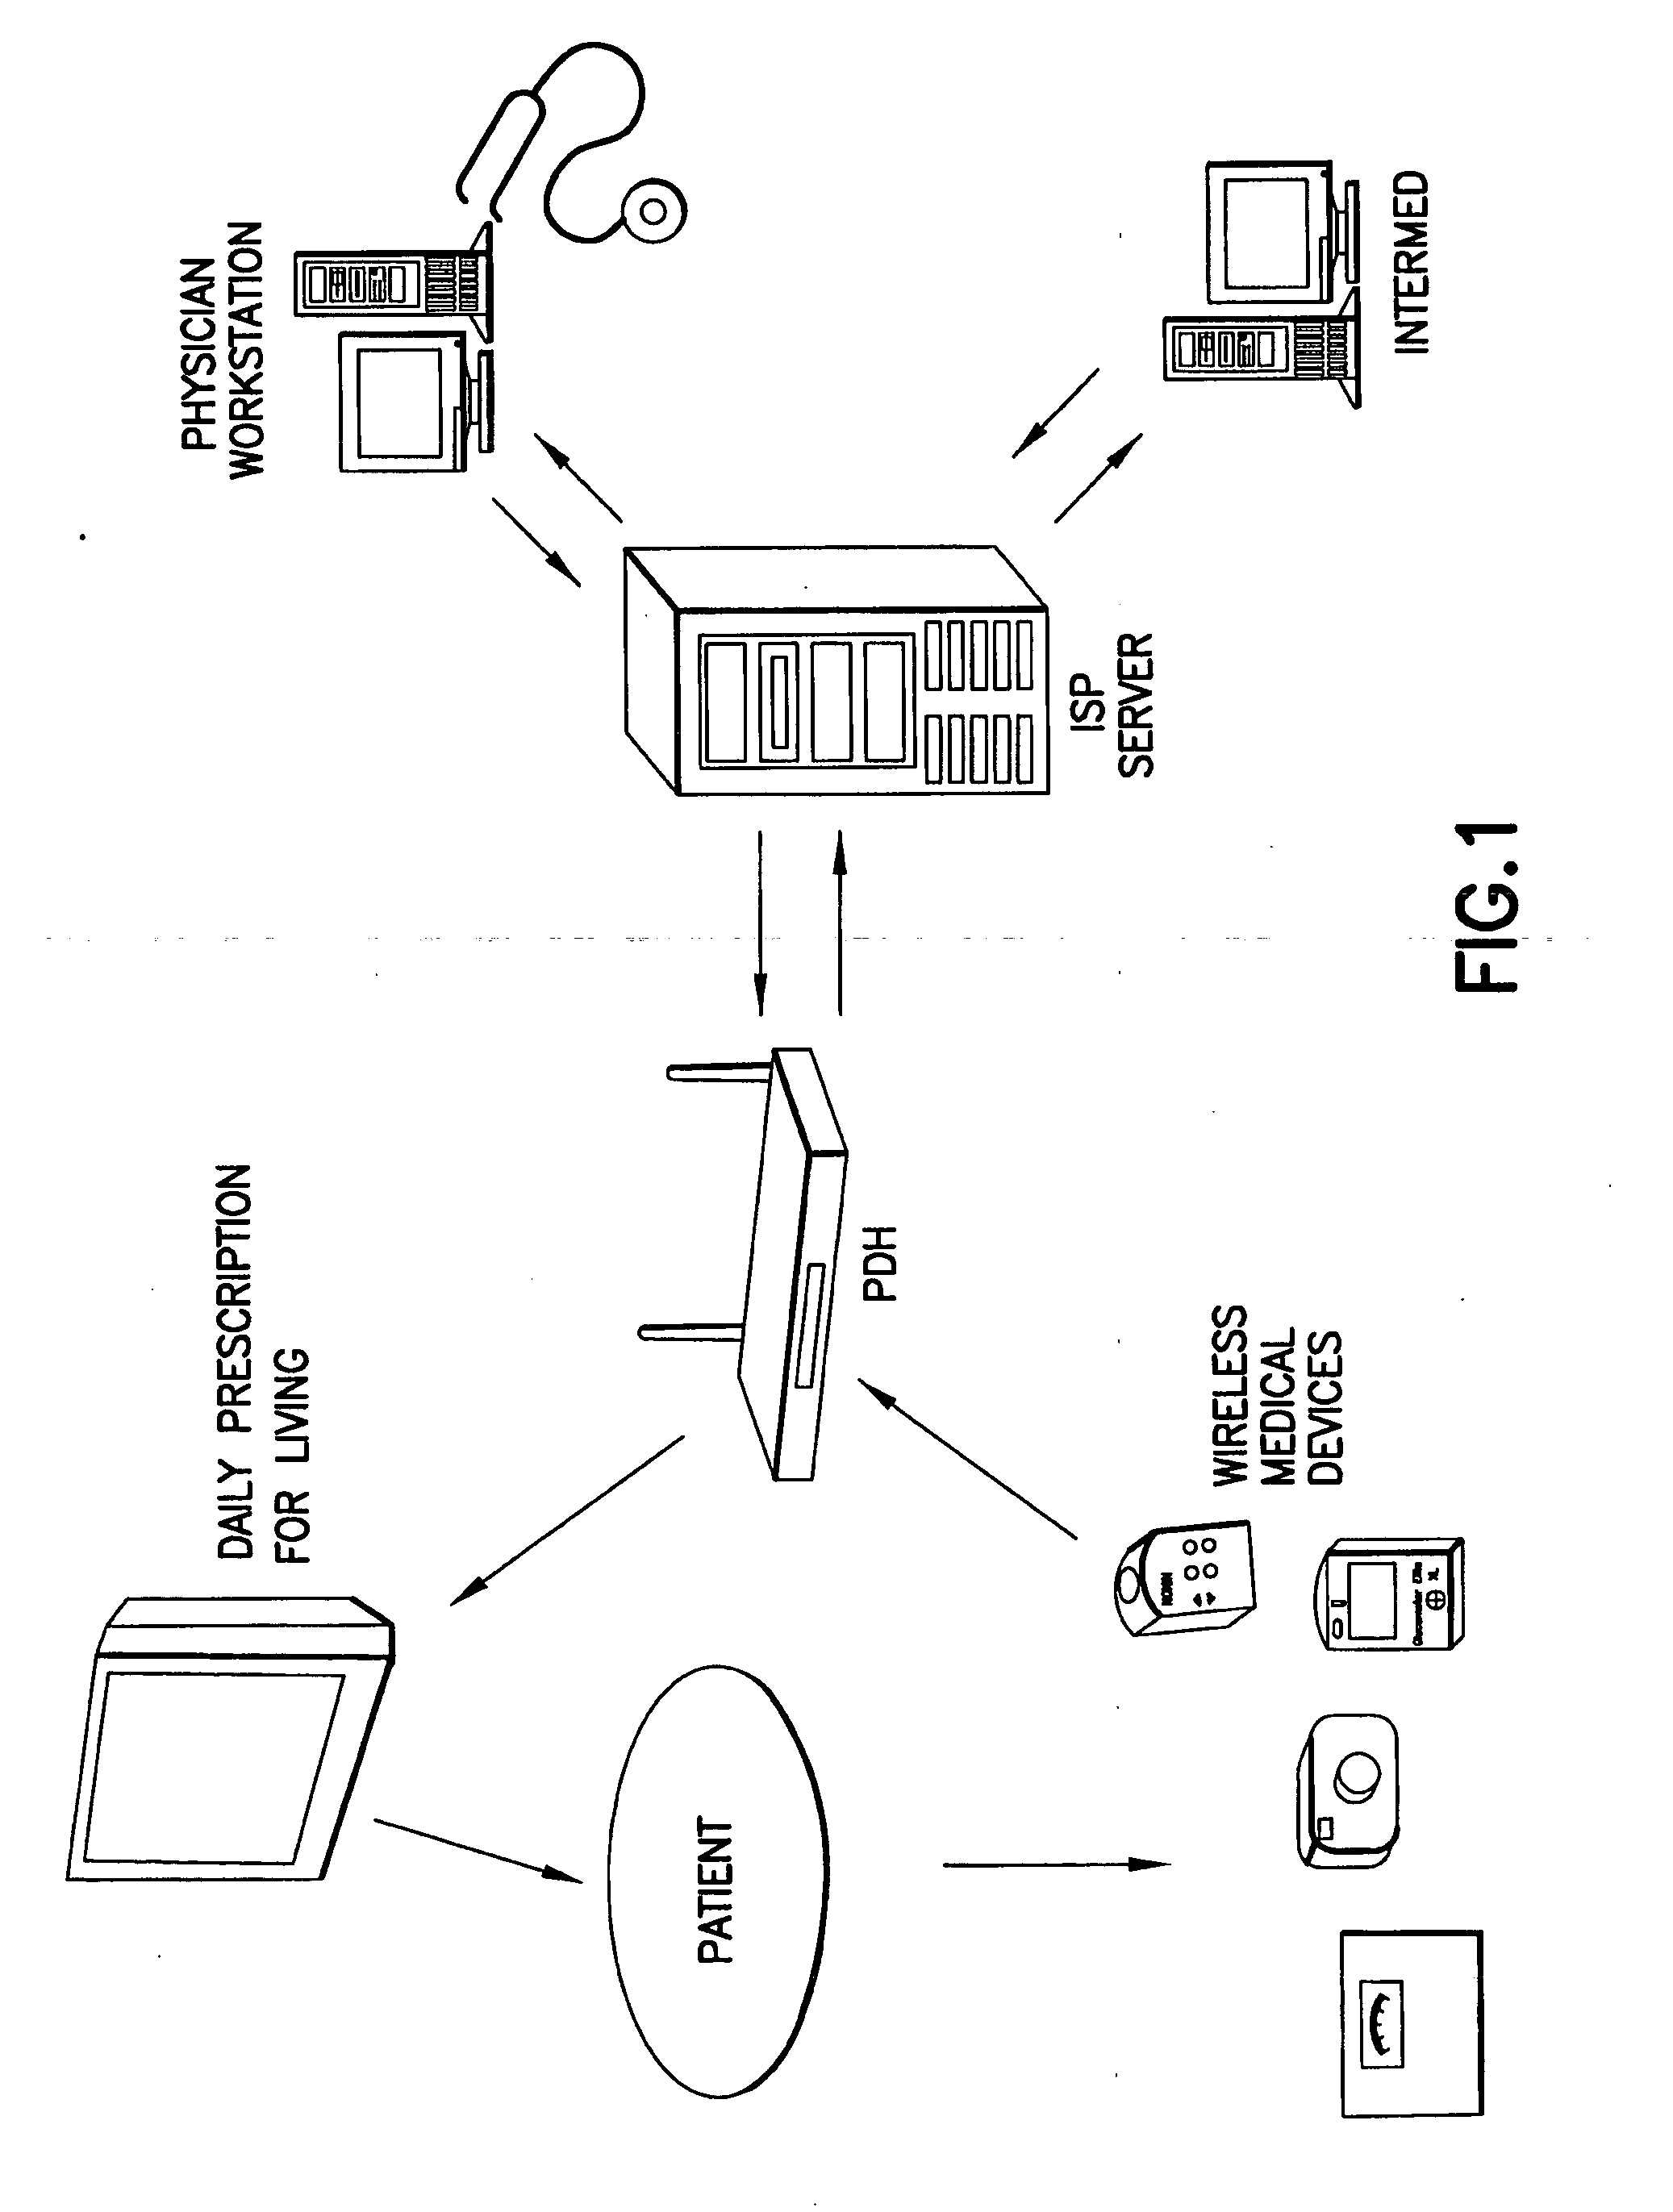 Method and apparatus for real time predictive modeling for chronically ill patients